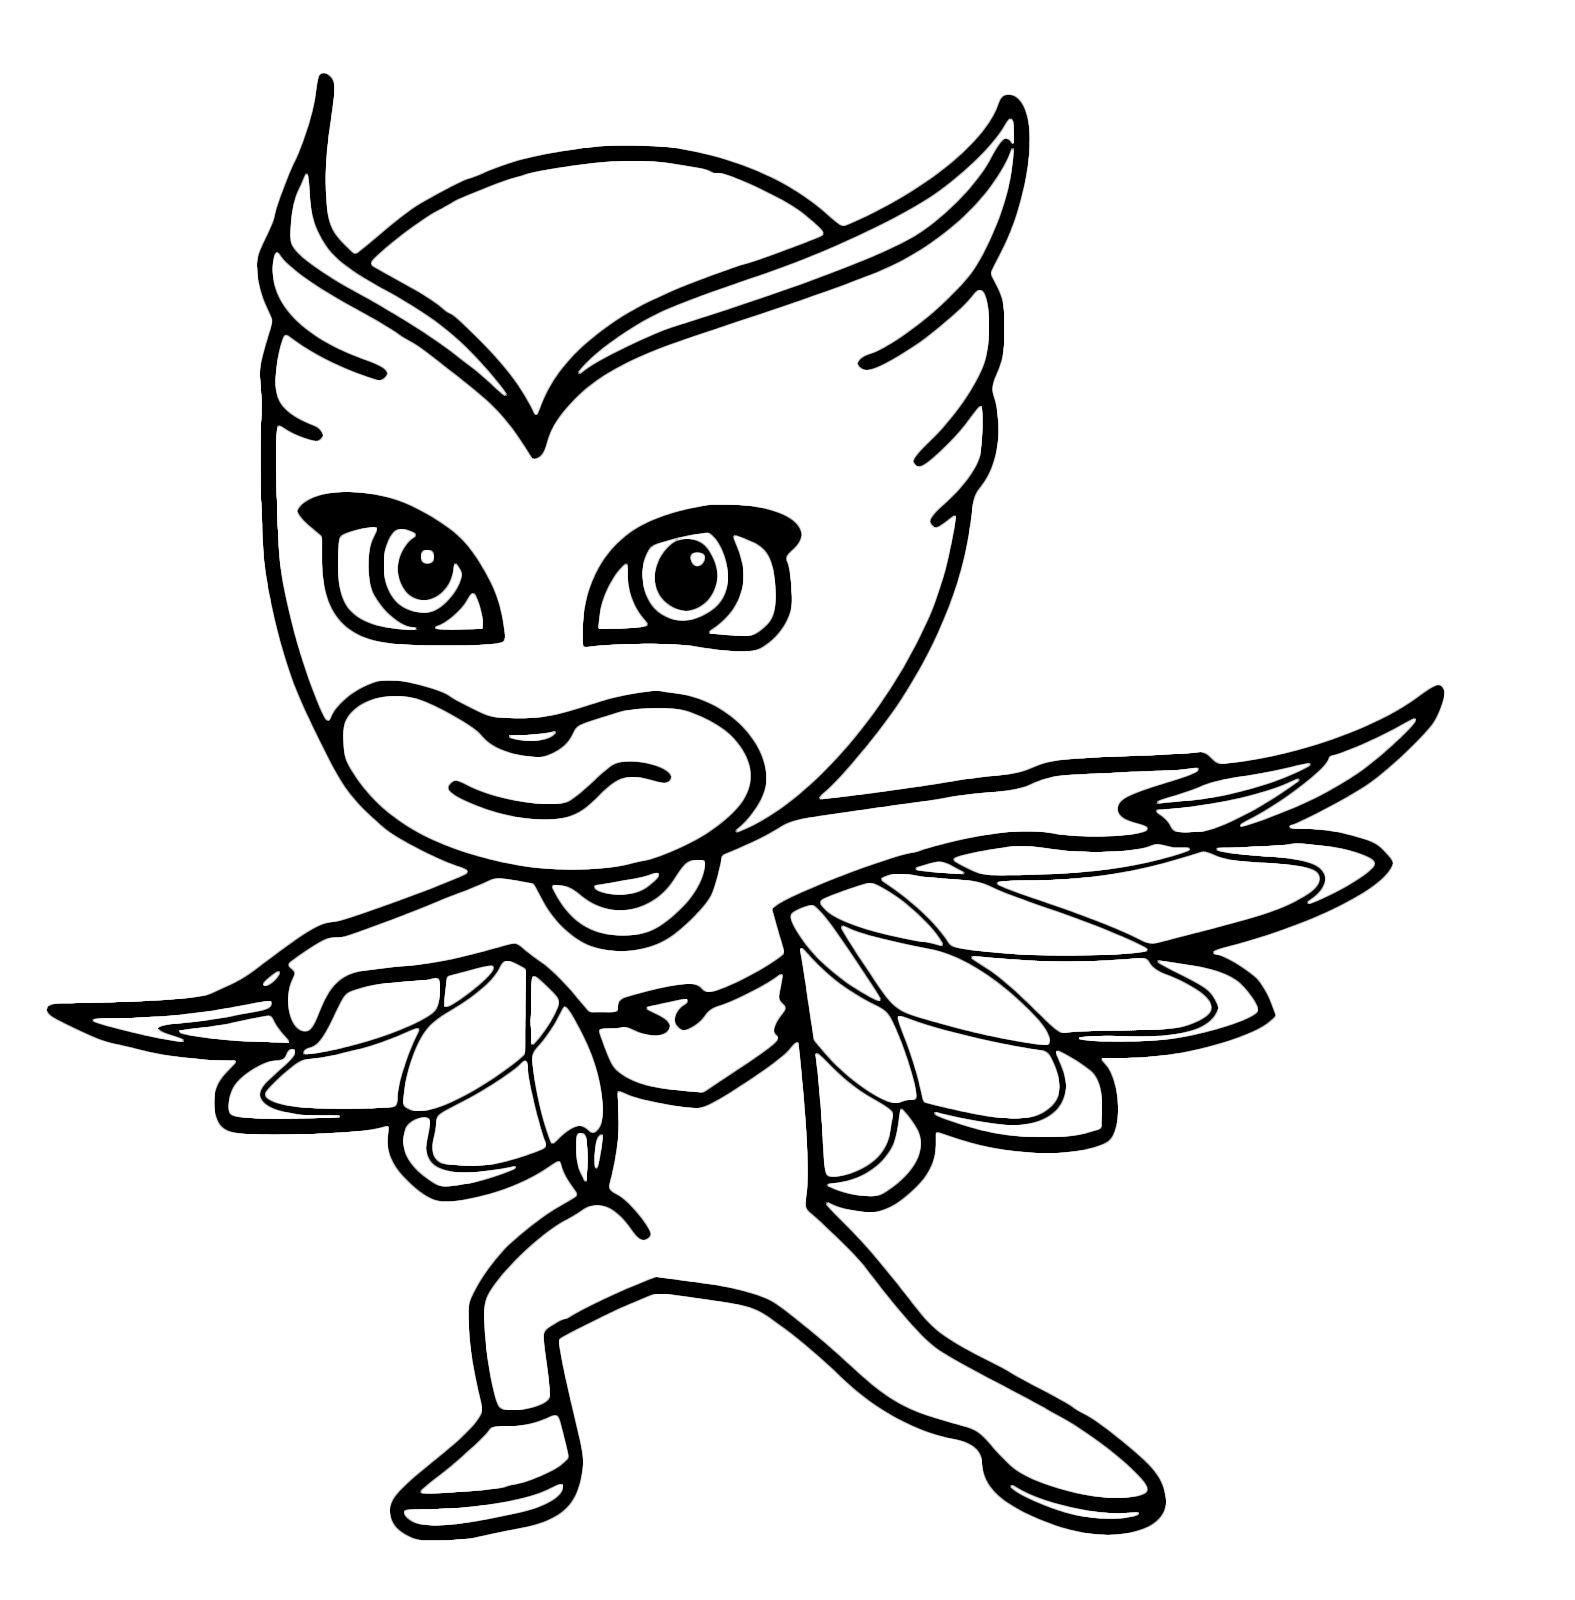 PJ Masks - Owlette is able to fly by using Super Owl Wings